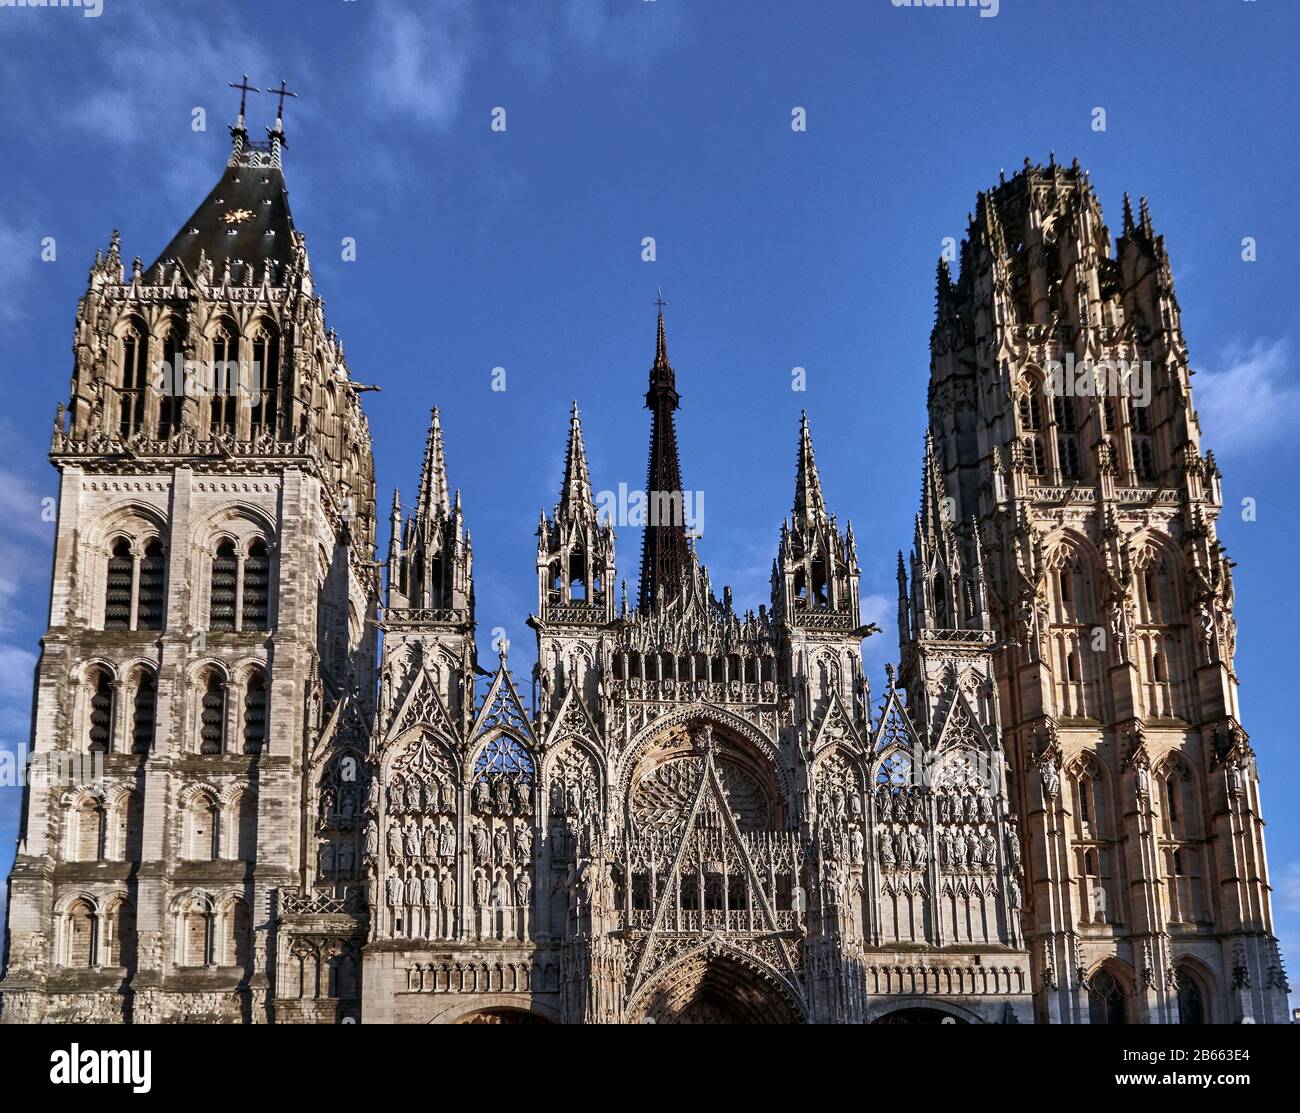 the Rouen Cathedral – known as Notre-Dame de l'Assomption de Rouen is a Roman Catholic church , The magnificent Gothic cathedral of Rouen has the highest church spire in France and a wealth of art, history and architectural details Stock Photo